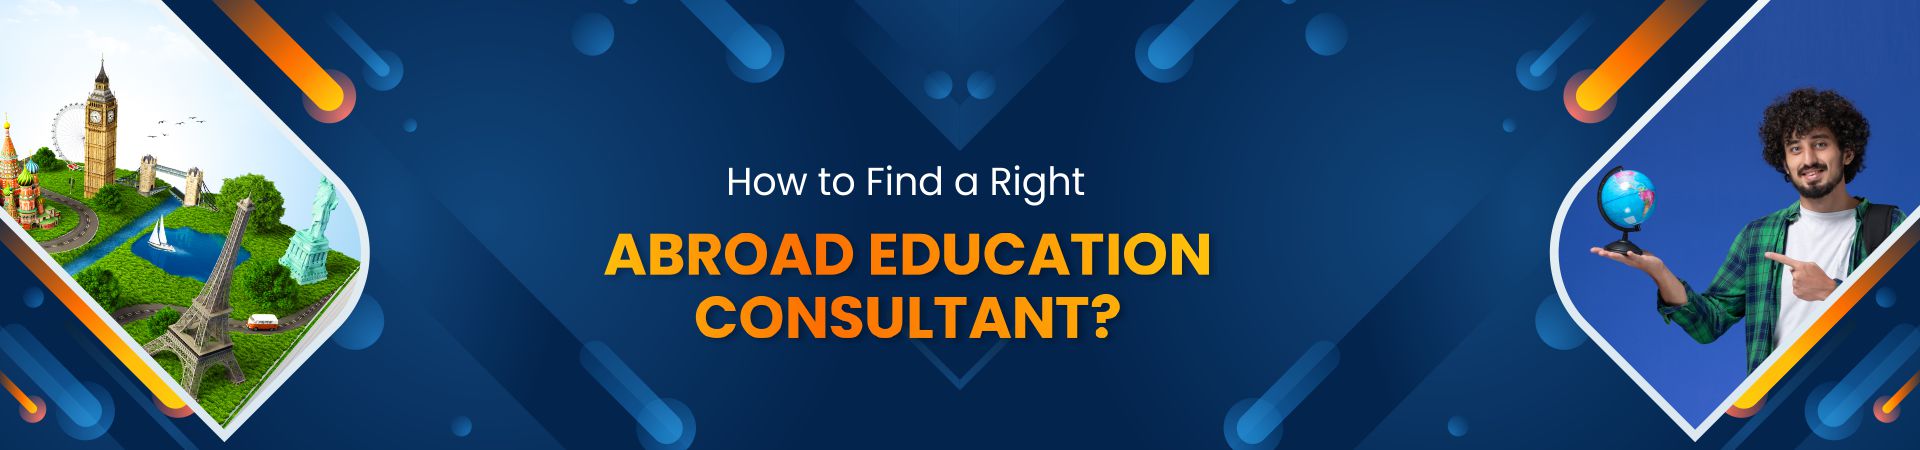 How to Find a Right Abroad Education Consultant?